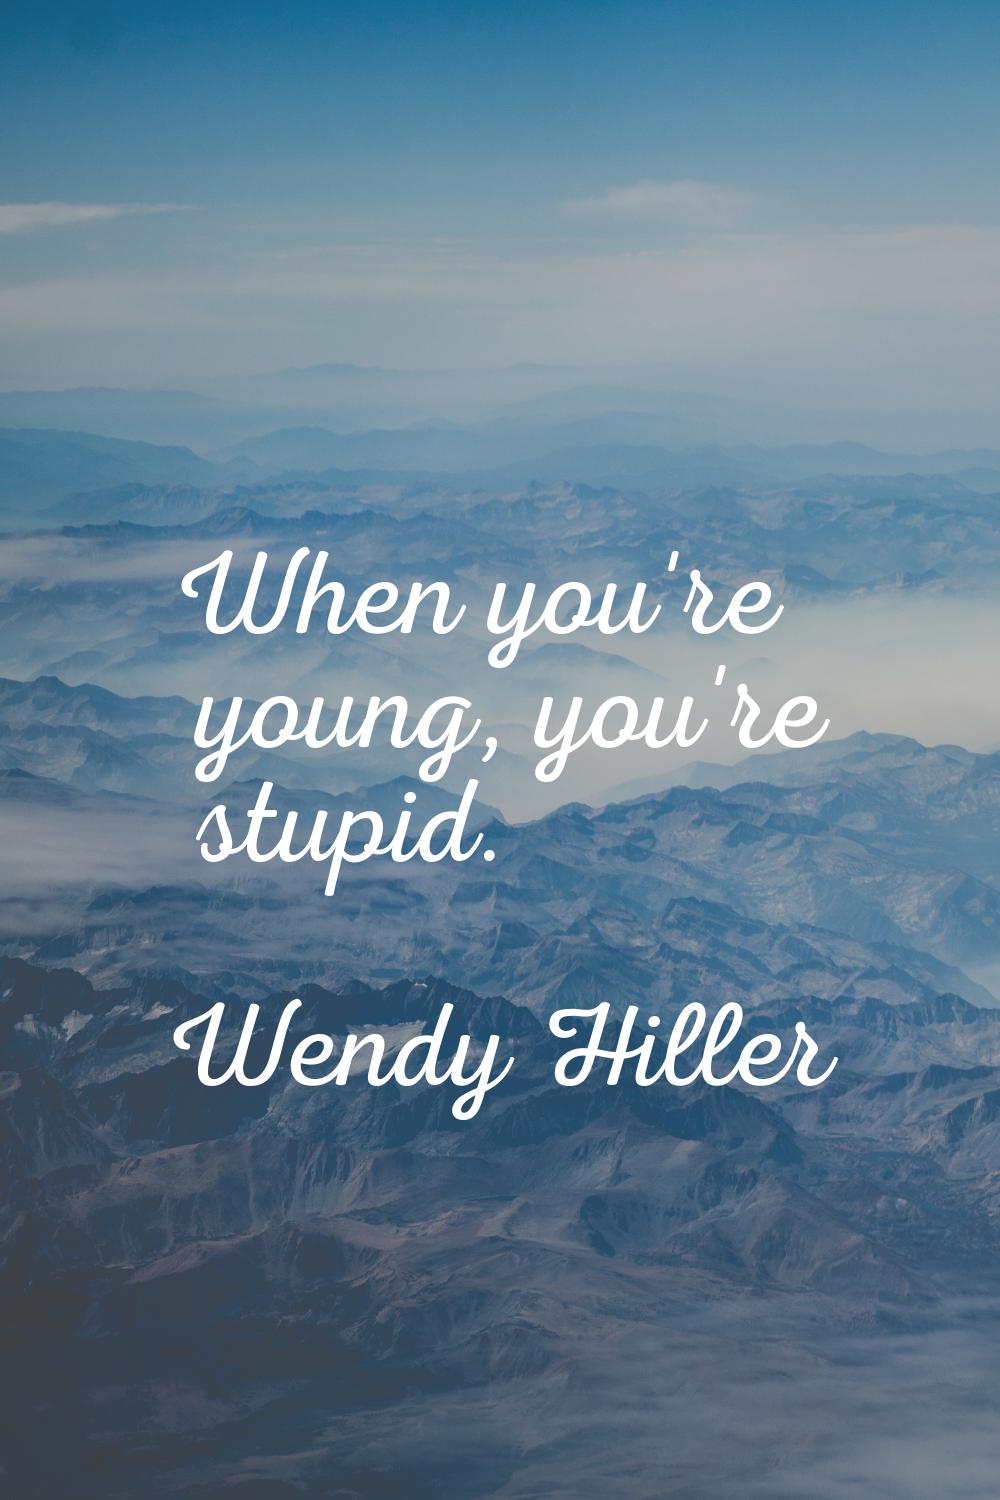 When you're young, you're stupid.